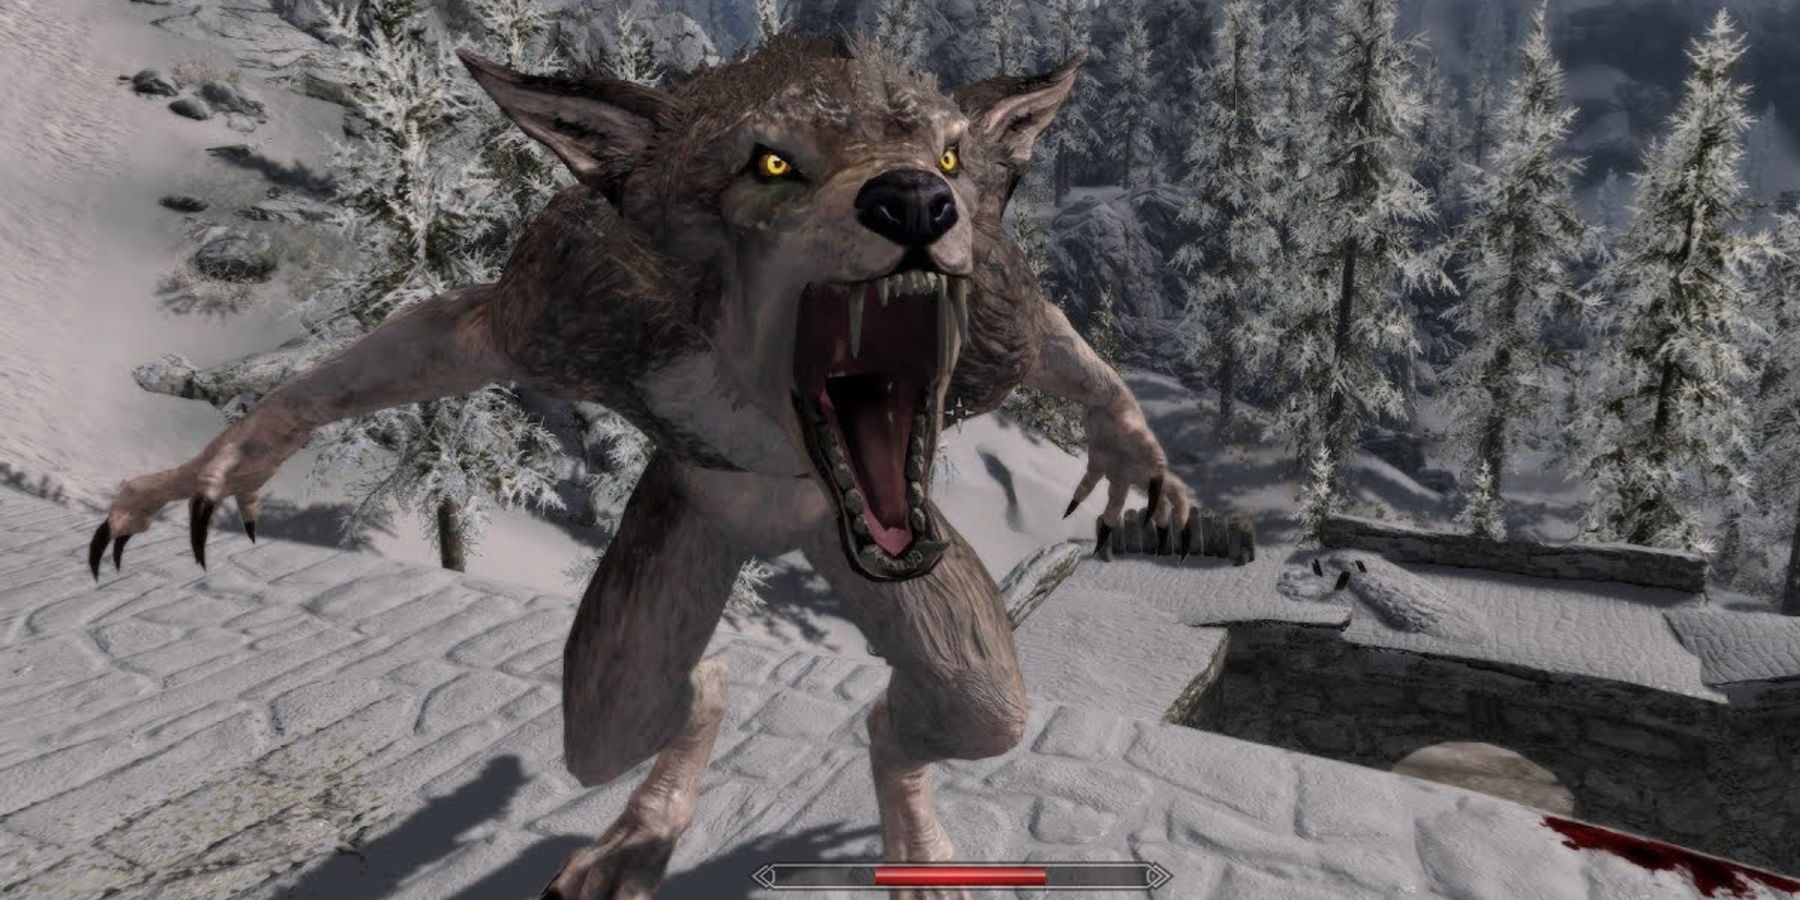 Modded timber werewolf attacking the Dragonborn in Skyrim